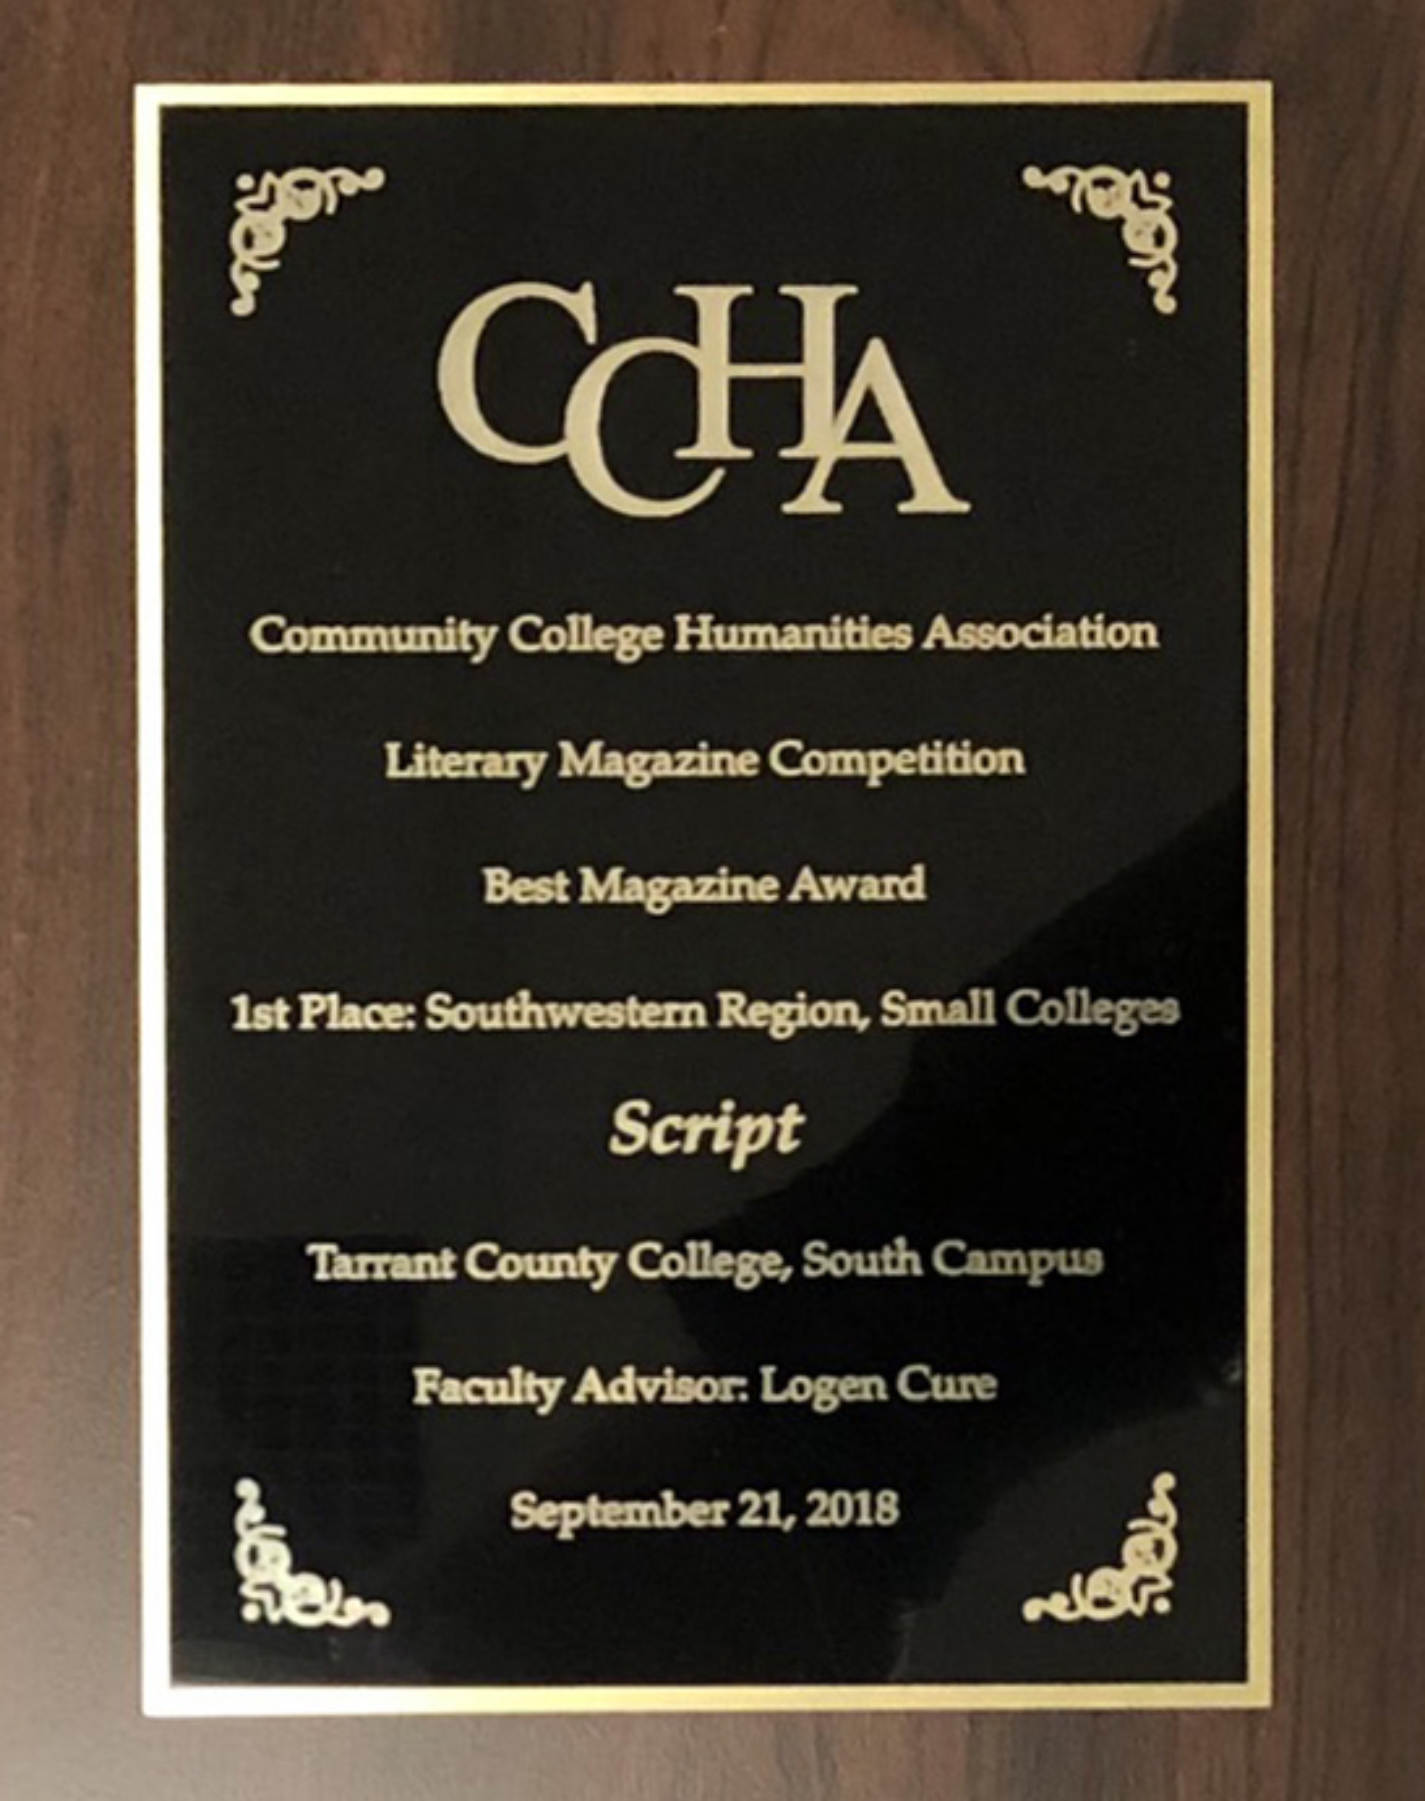 Script, South Campus’ literary magazine, won the Best Magazine award in its division for their 2017 edition.